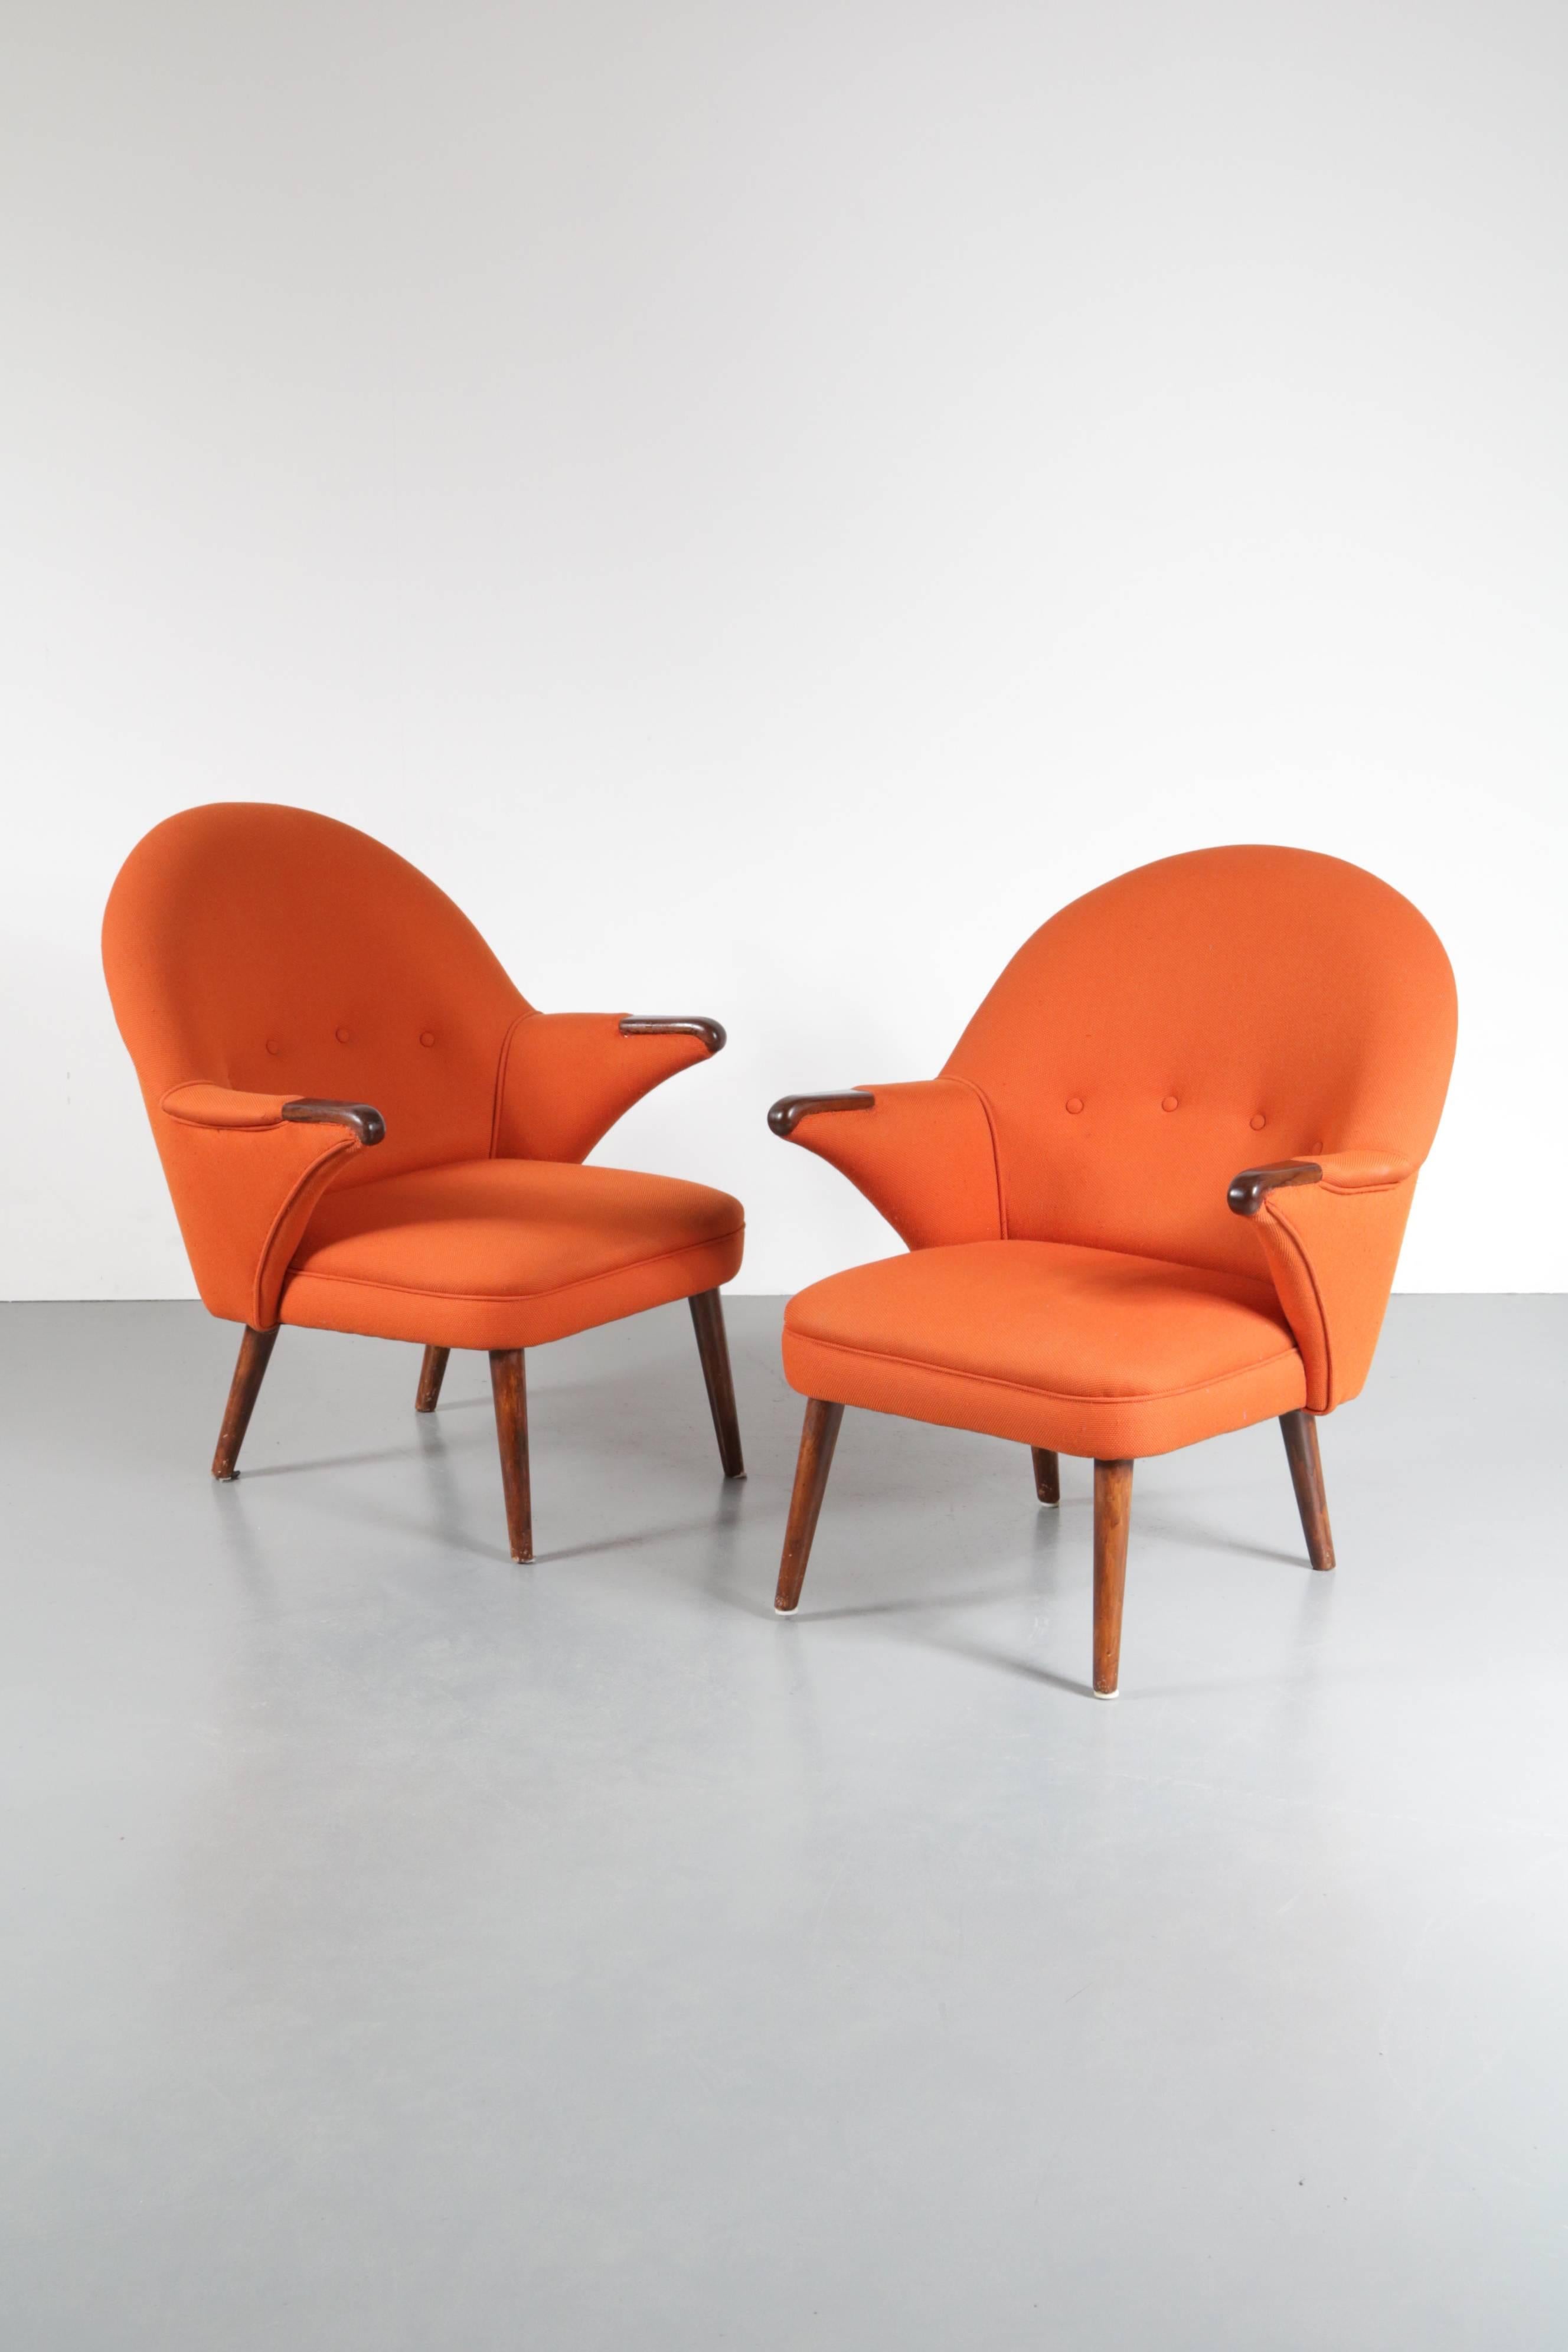 A beautiful pair of lounge chairs in the style of Hans J. Wegner's Papa Bear manufactured, circa 1950.

We are not sure about the designer of these chairs, but they resemble a smaller version of the famous Papa Bear by Hans J. Wegner. They are very